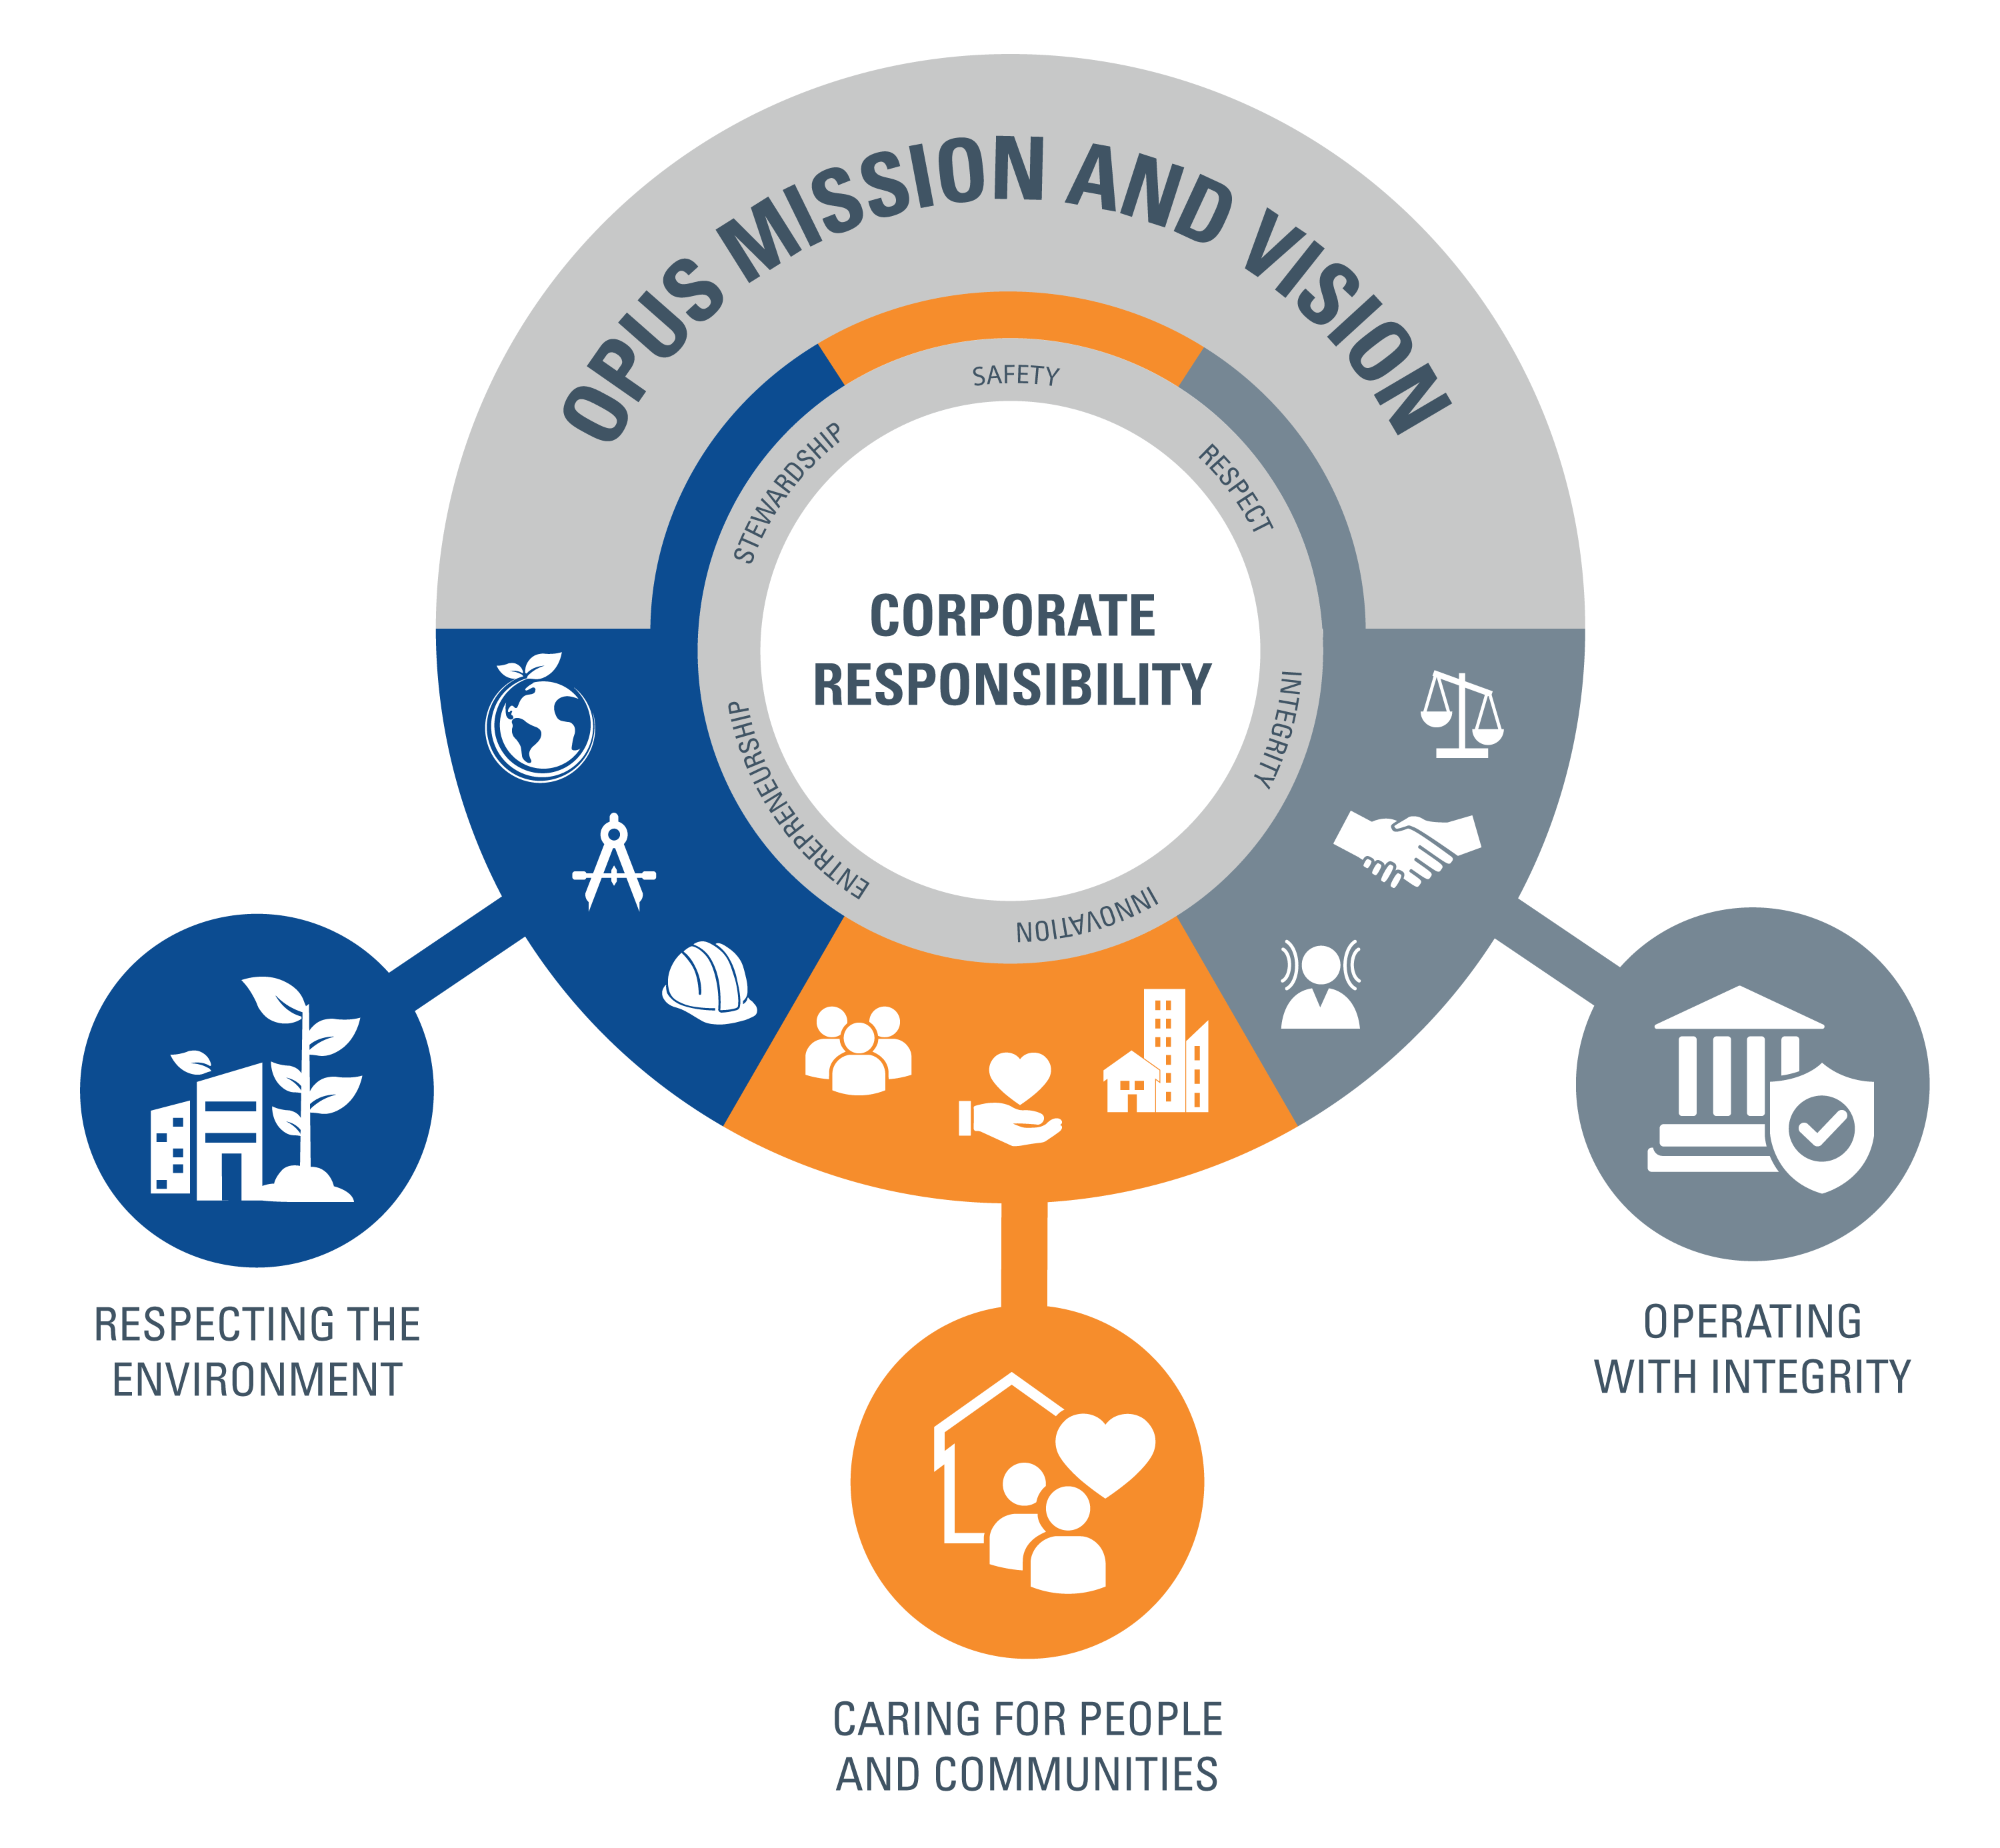 A graphic that shows the relationship between Opus's mission, vision and values and corporate responsibility and the focus areas of respecting the environment, caring for people and communities and operating with integrity.